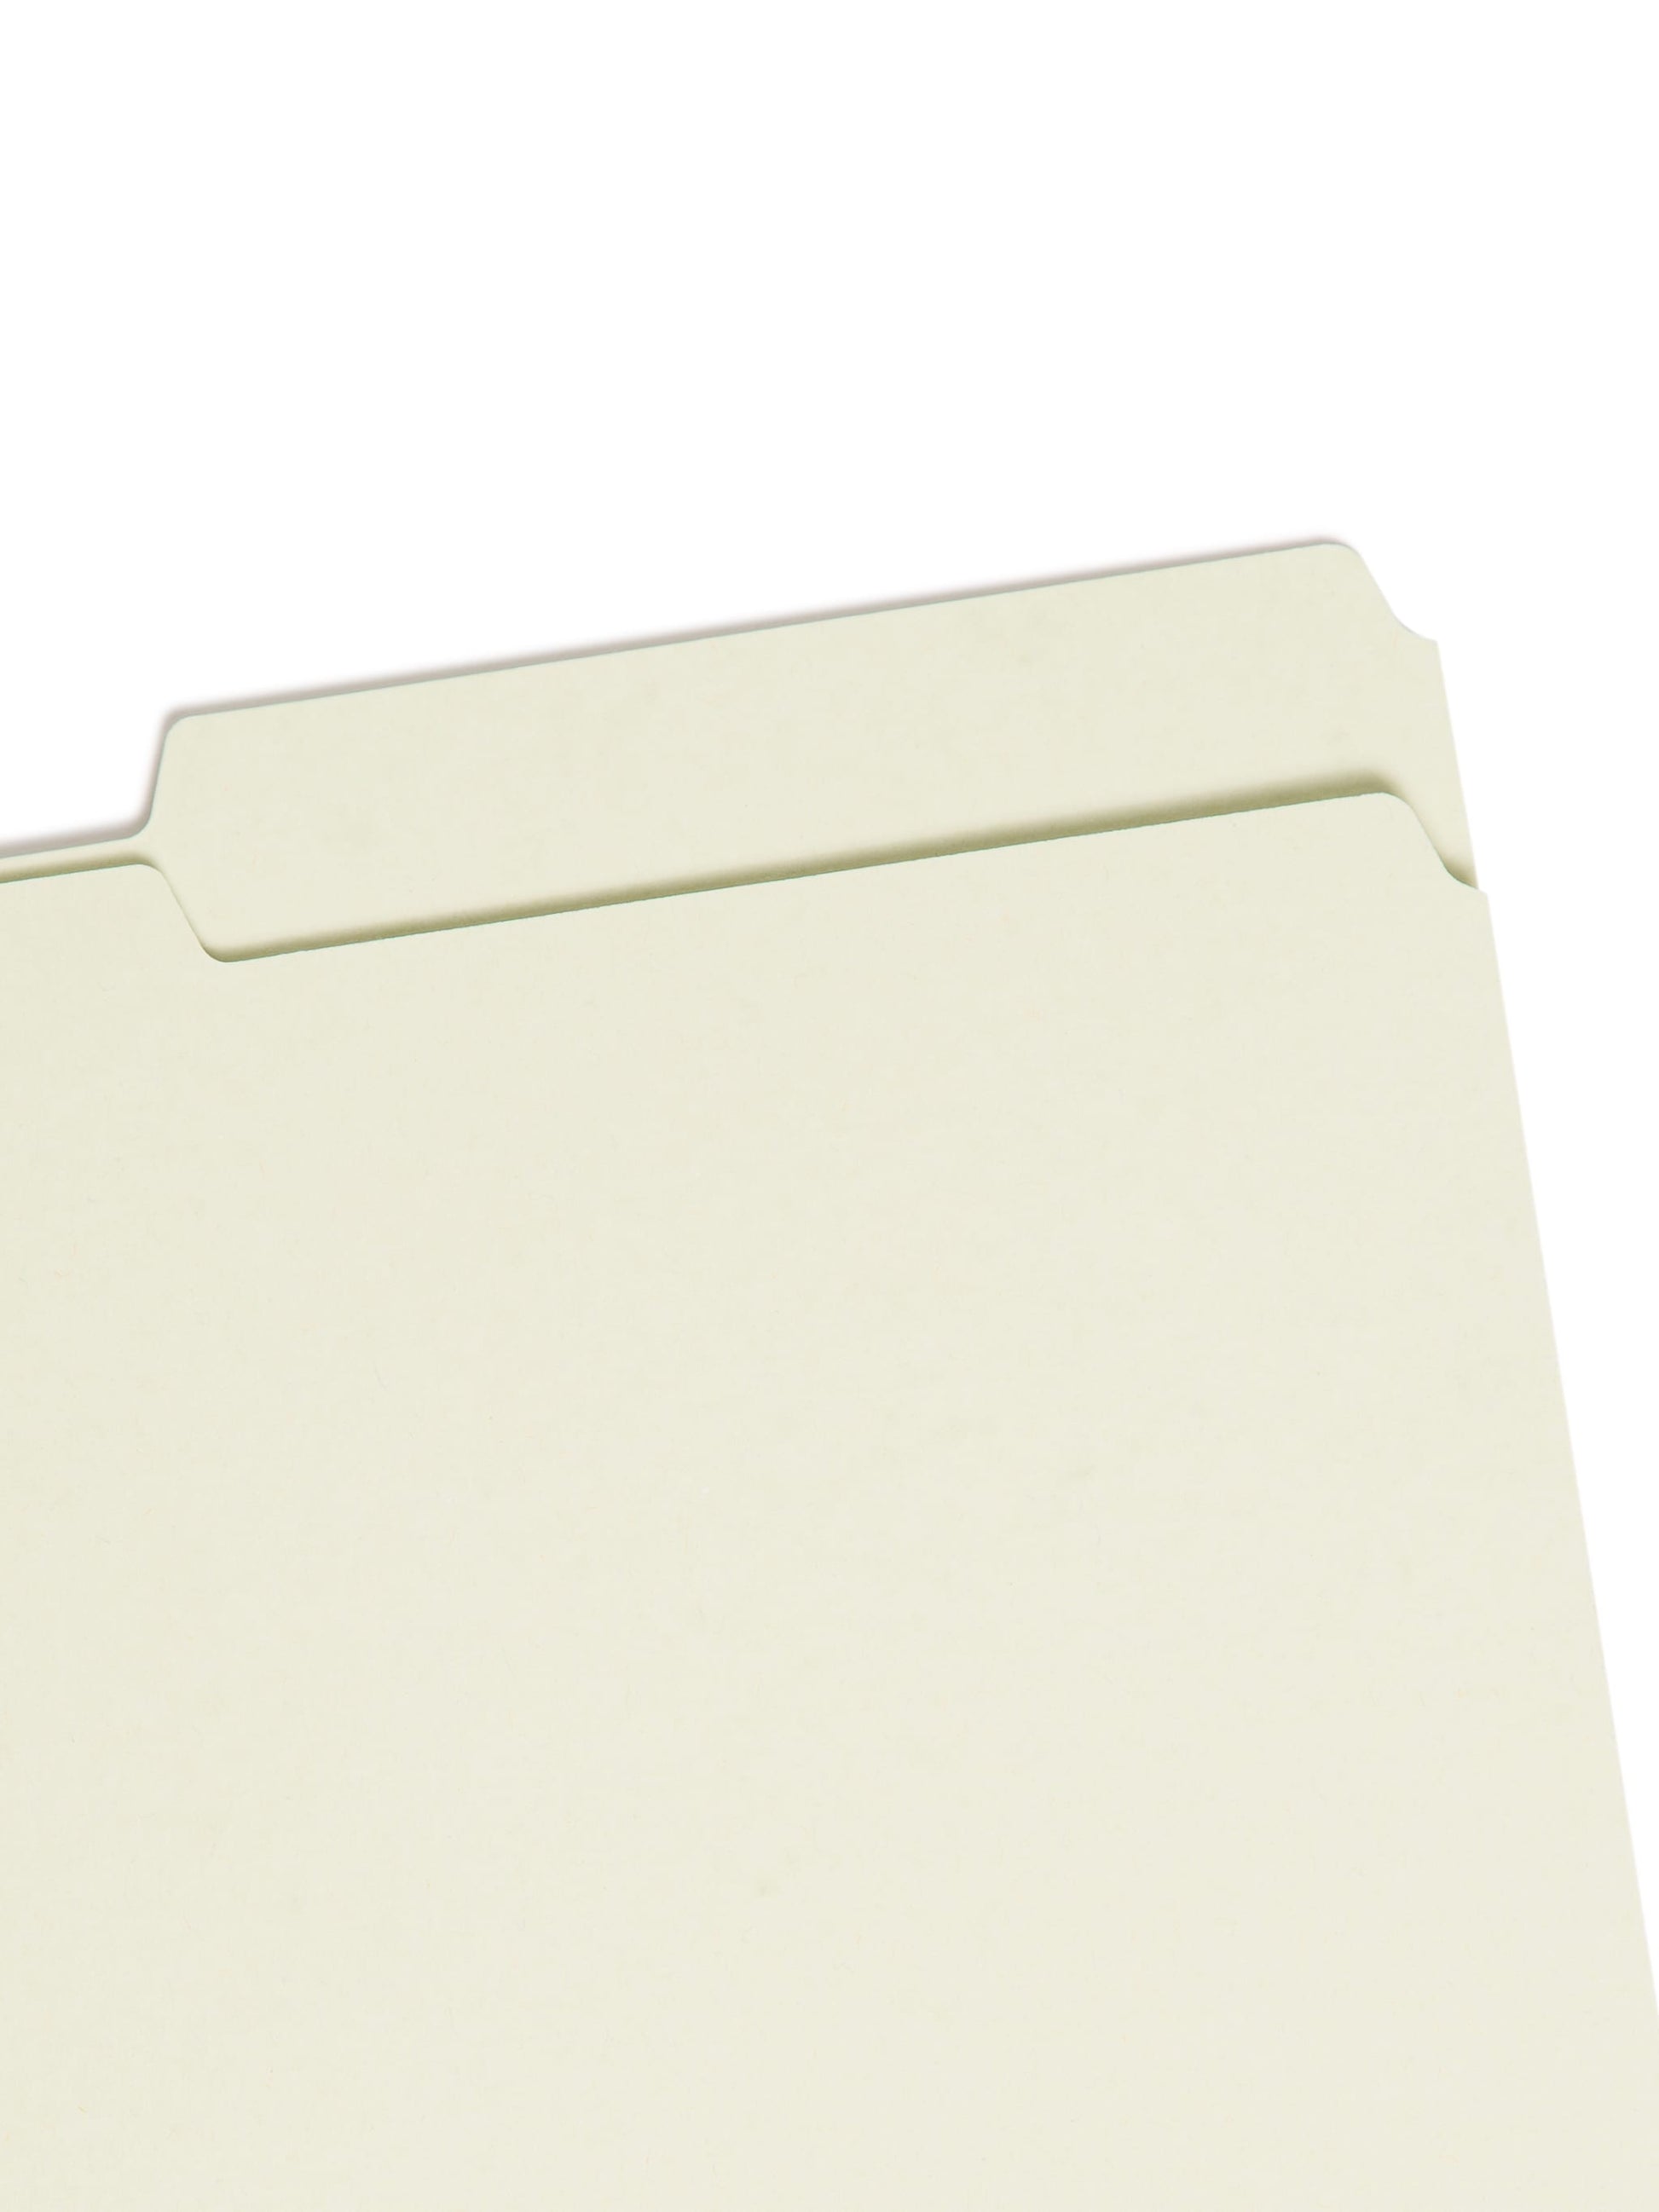 SafeSHIELD® Pressboard Fastener File Folders, 2 inch Expansion, 2/5-Cut Right Tab, Gray/Green Color, Legal Size, Set of 25, 086486199209